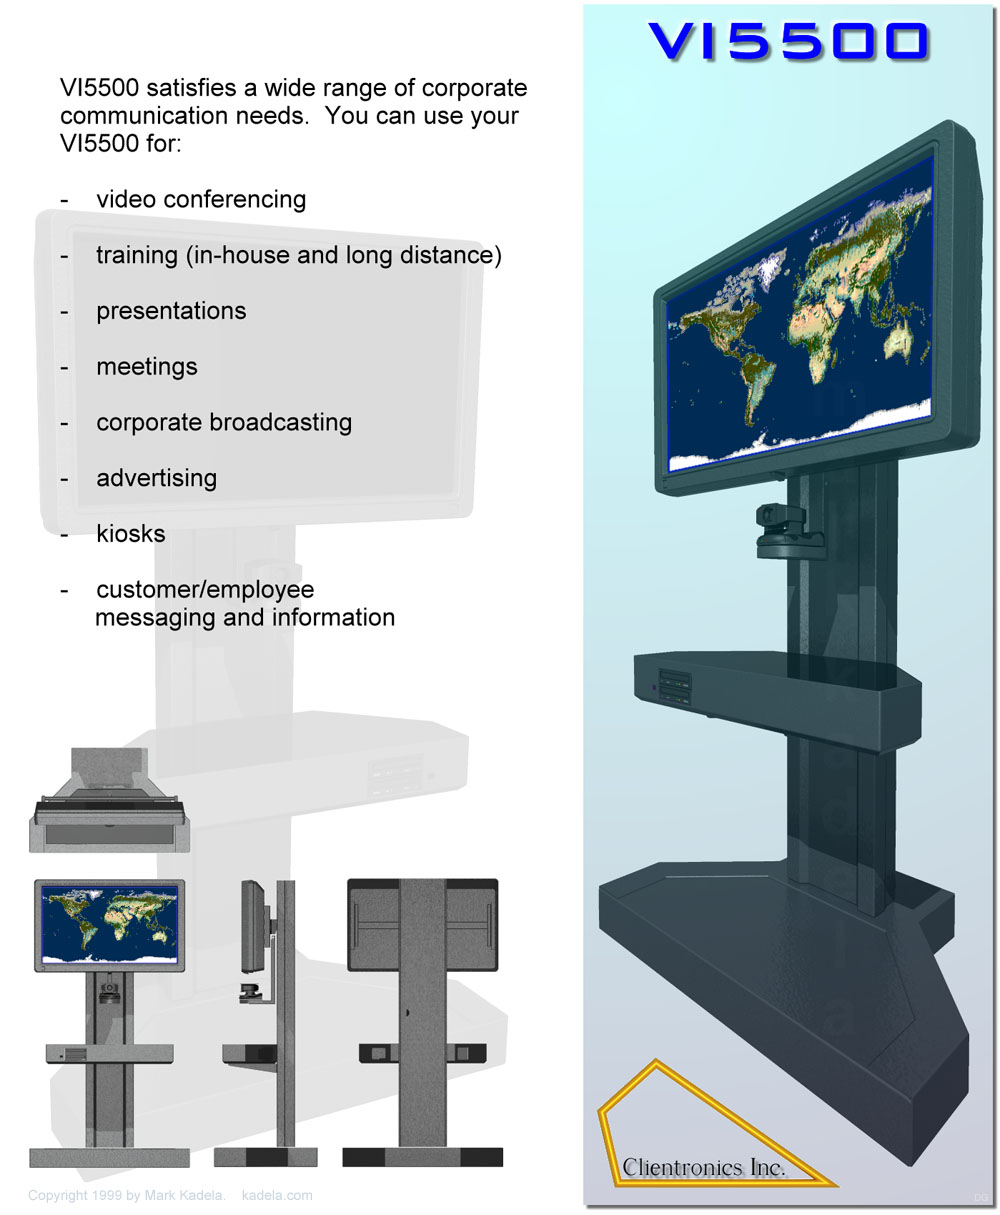 VI-5500 Communications and Video Conferencing Platform